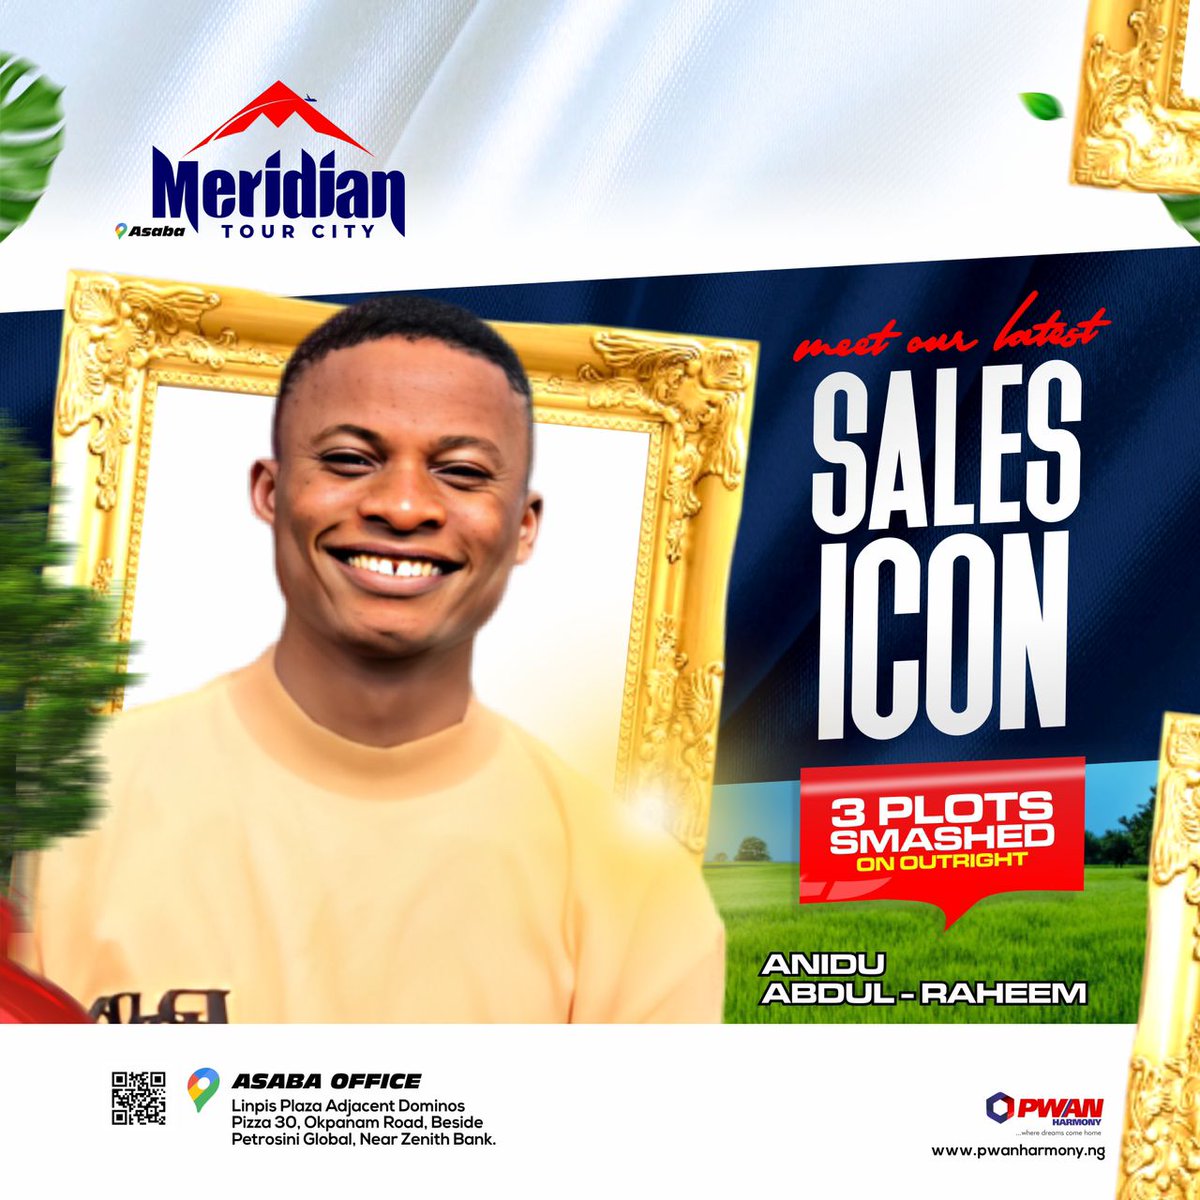 TO A SALES KING(ANIDU ABDUL - RAHEEM) CONGRATULATIONS ANIDU ABDUL - RAHEEM we admire your passion for real estate and the energy you give your marketing as a PBO, In the coming days we hope to celebrate you more. He smashed 3plots of Meridian Tour City Estate on Outright.